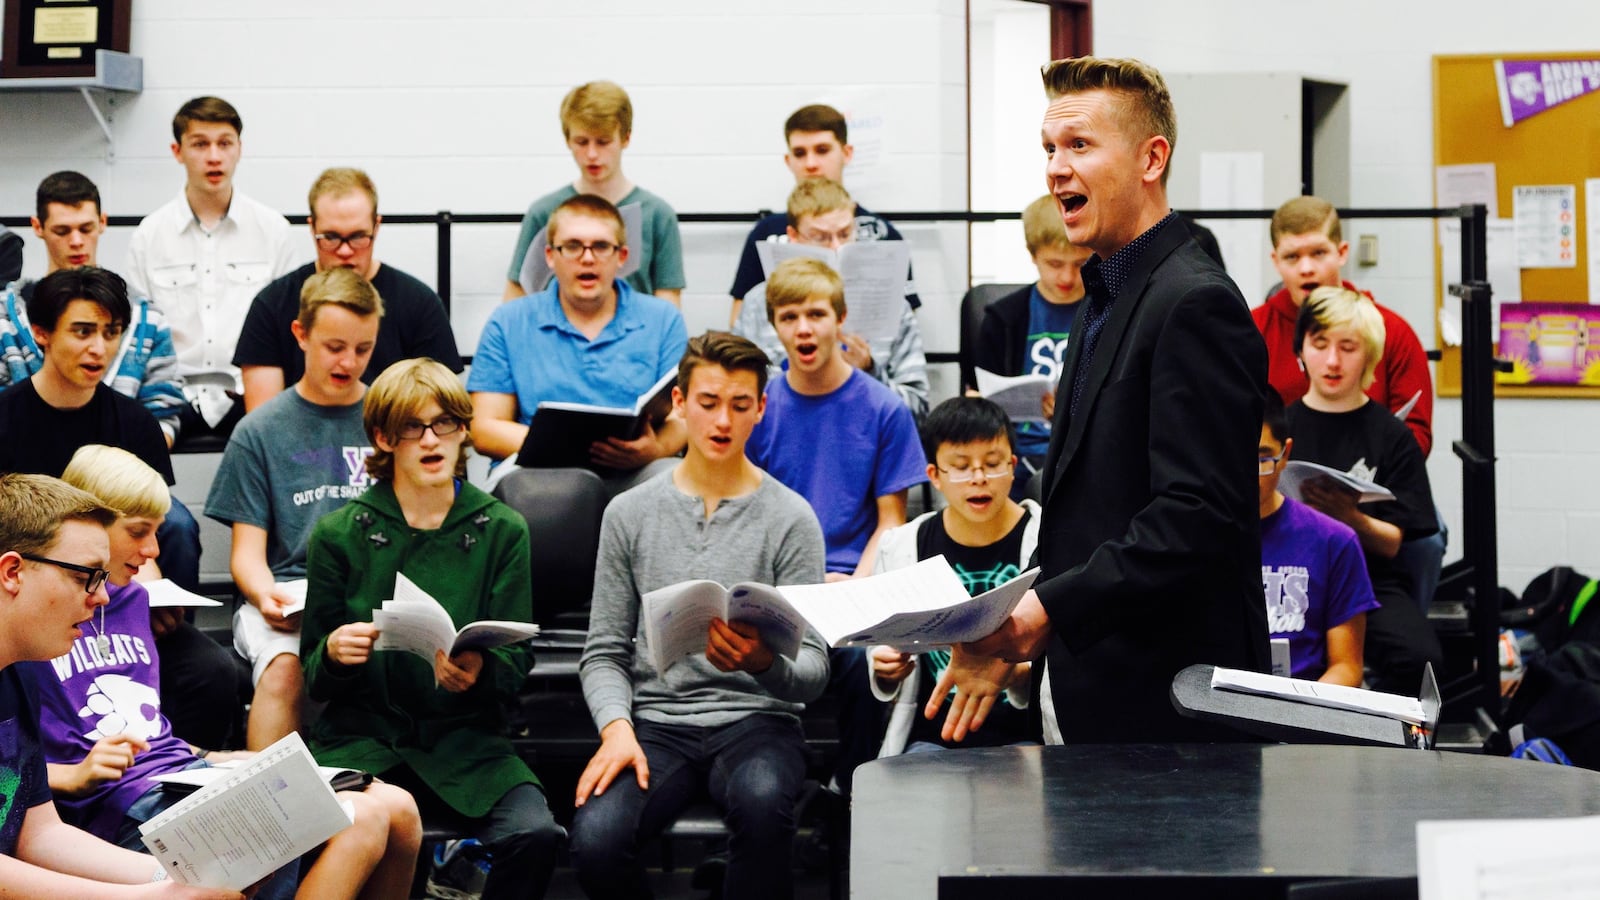 Chris Maunu, choir director at Arvada West High School, works with students.